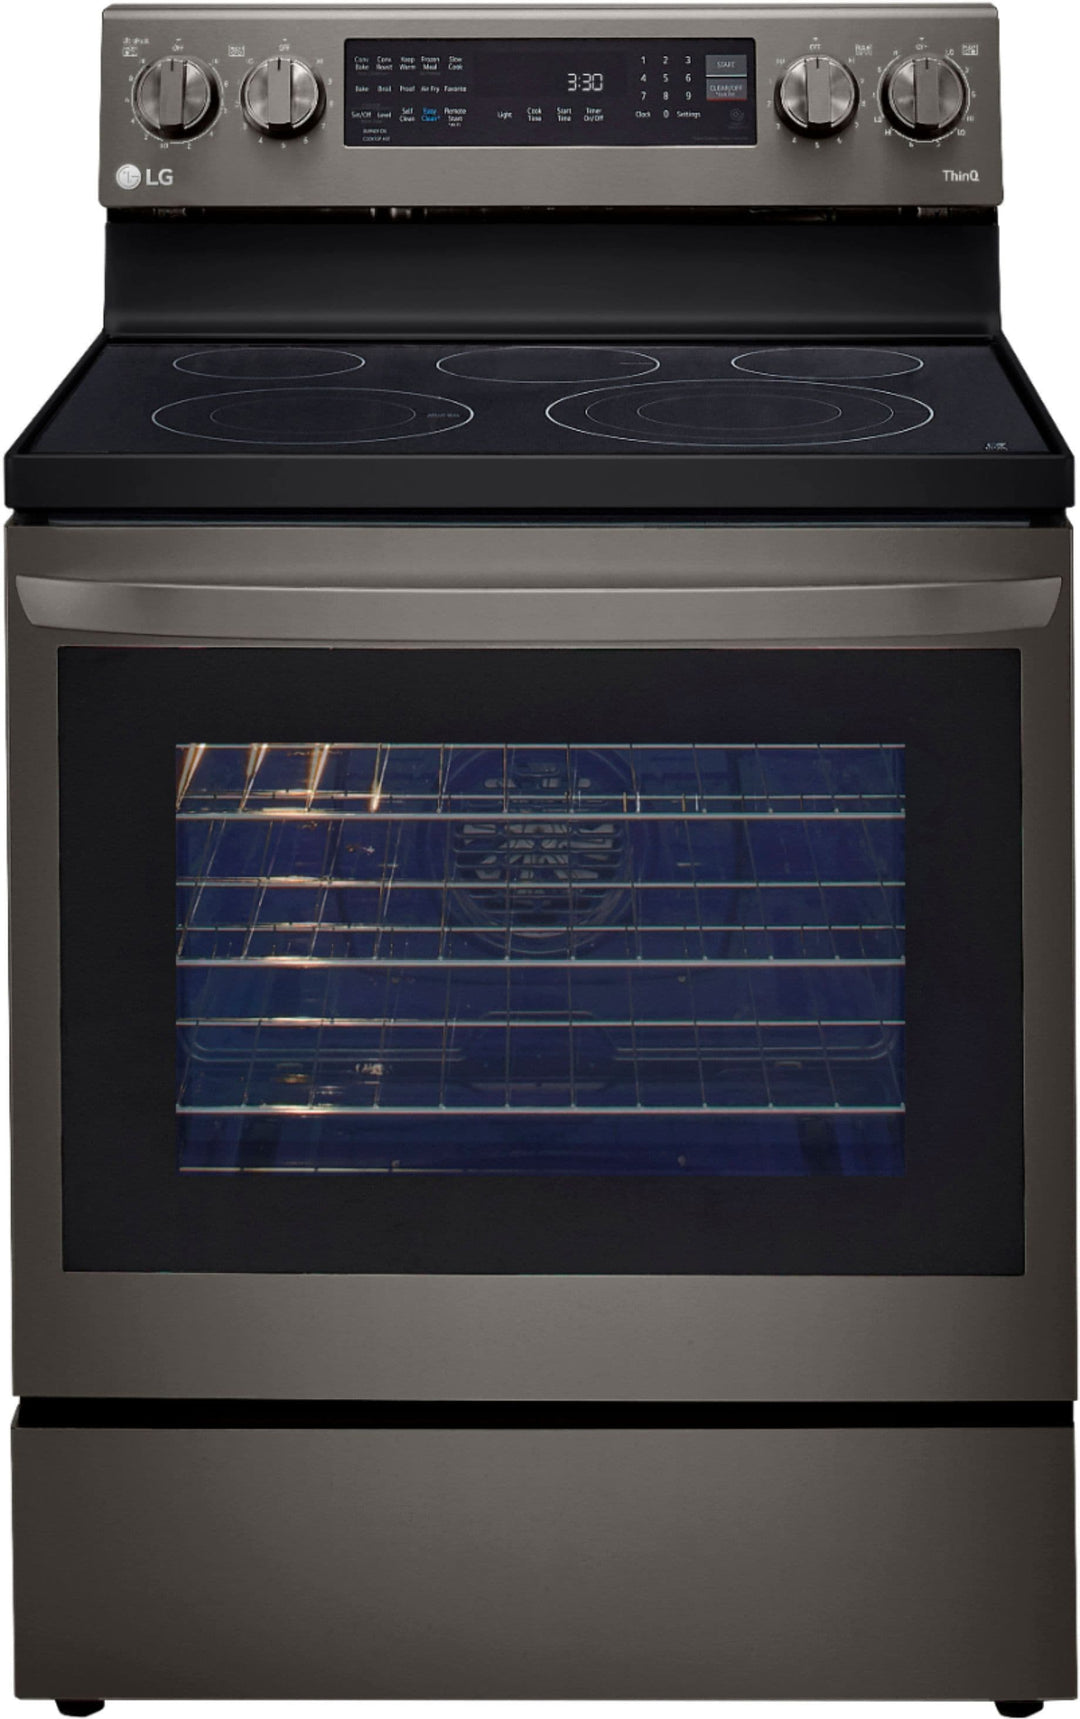 LG - 6.3 Cu. Ft. Smart Freestanding Electric Convection Range with EasyClean, Air Fry and InstaView - Black stainless steel_21